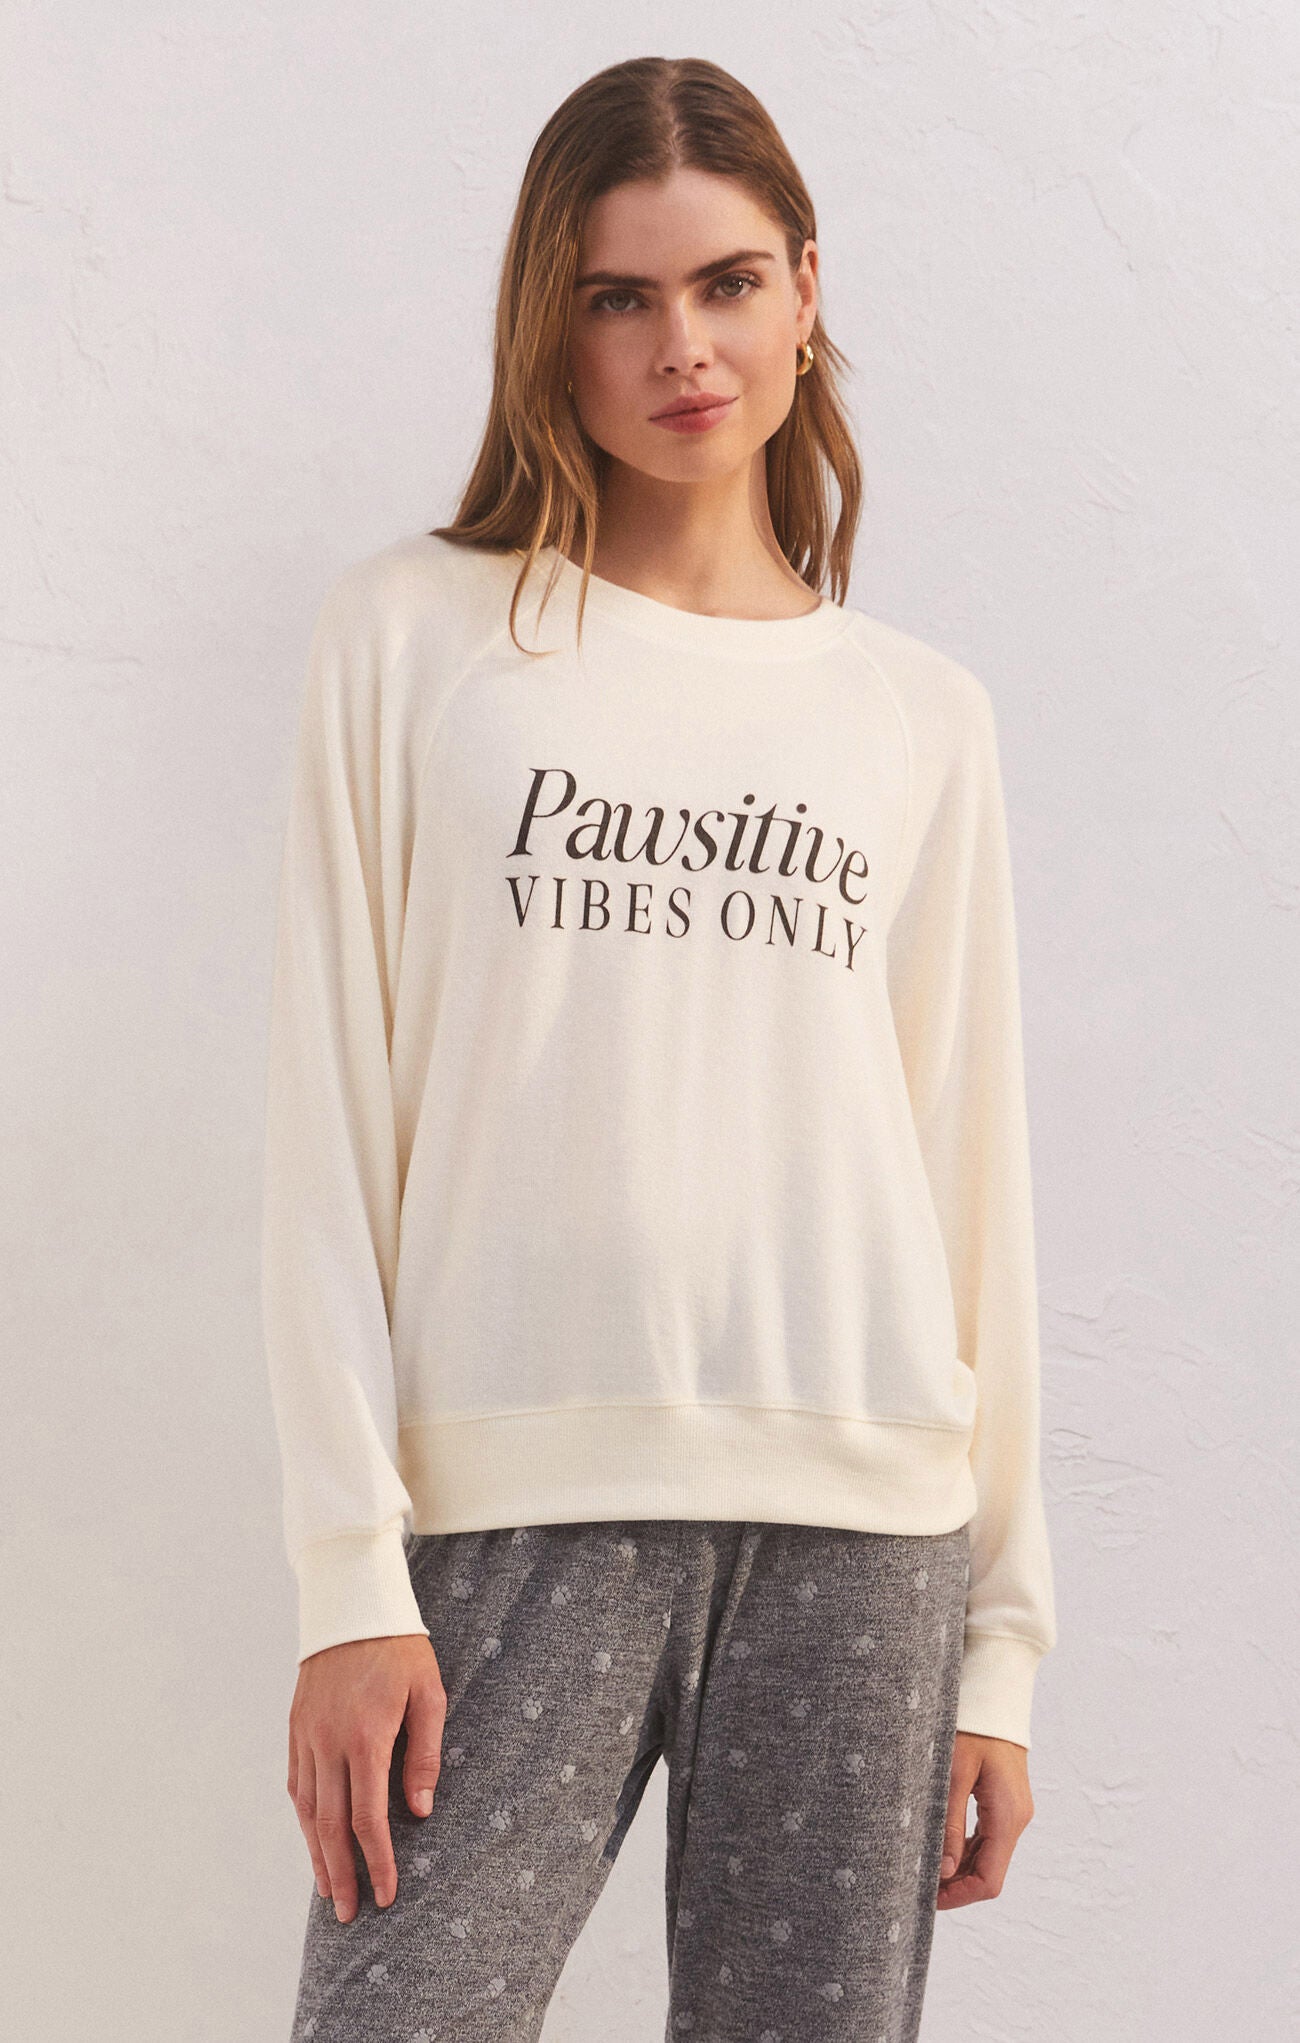 Sale Cassie Pawsitive Vibes Only Long Sleeve Top Bone